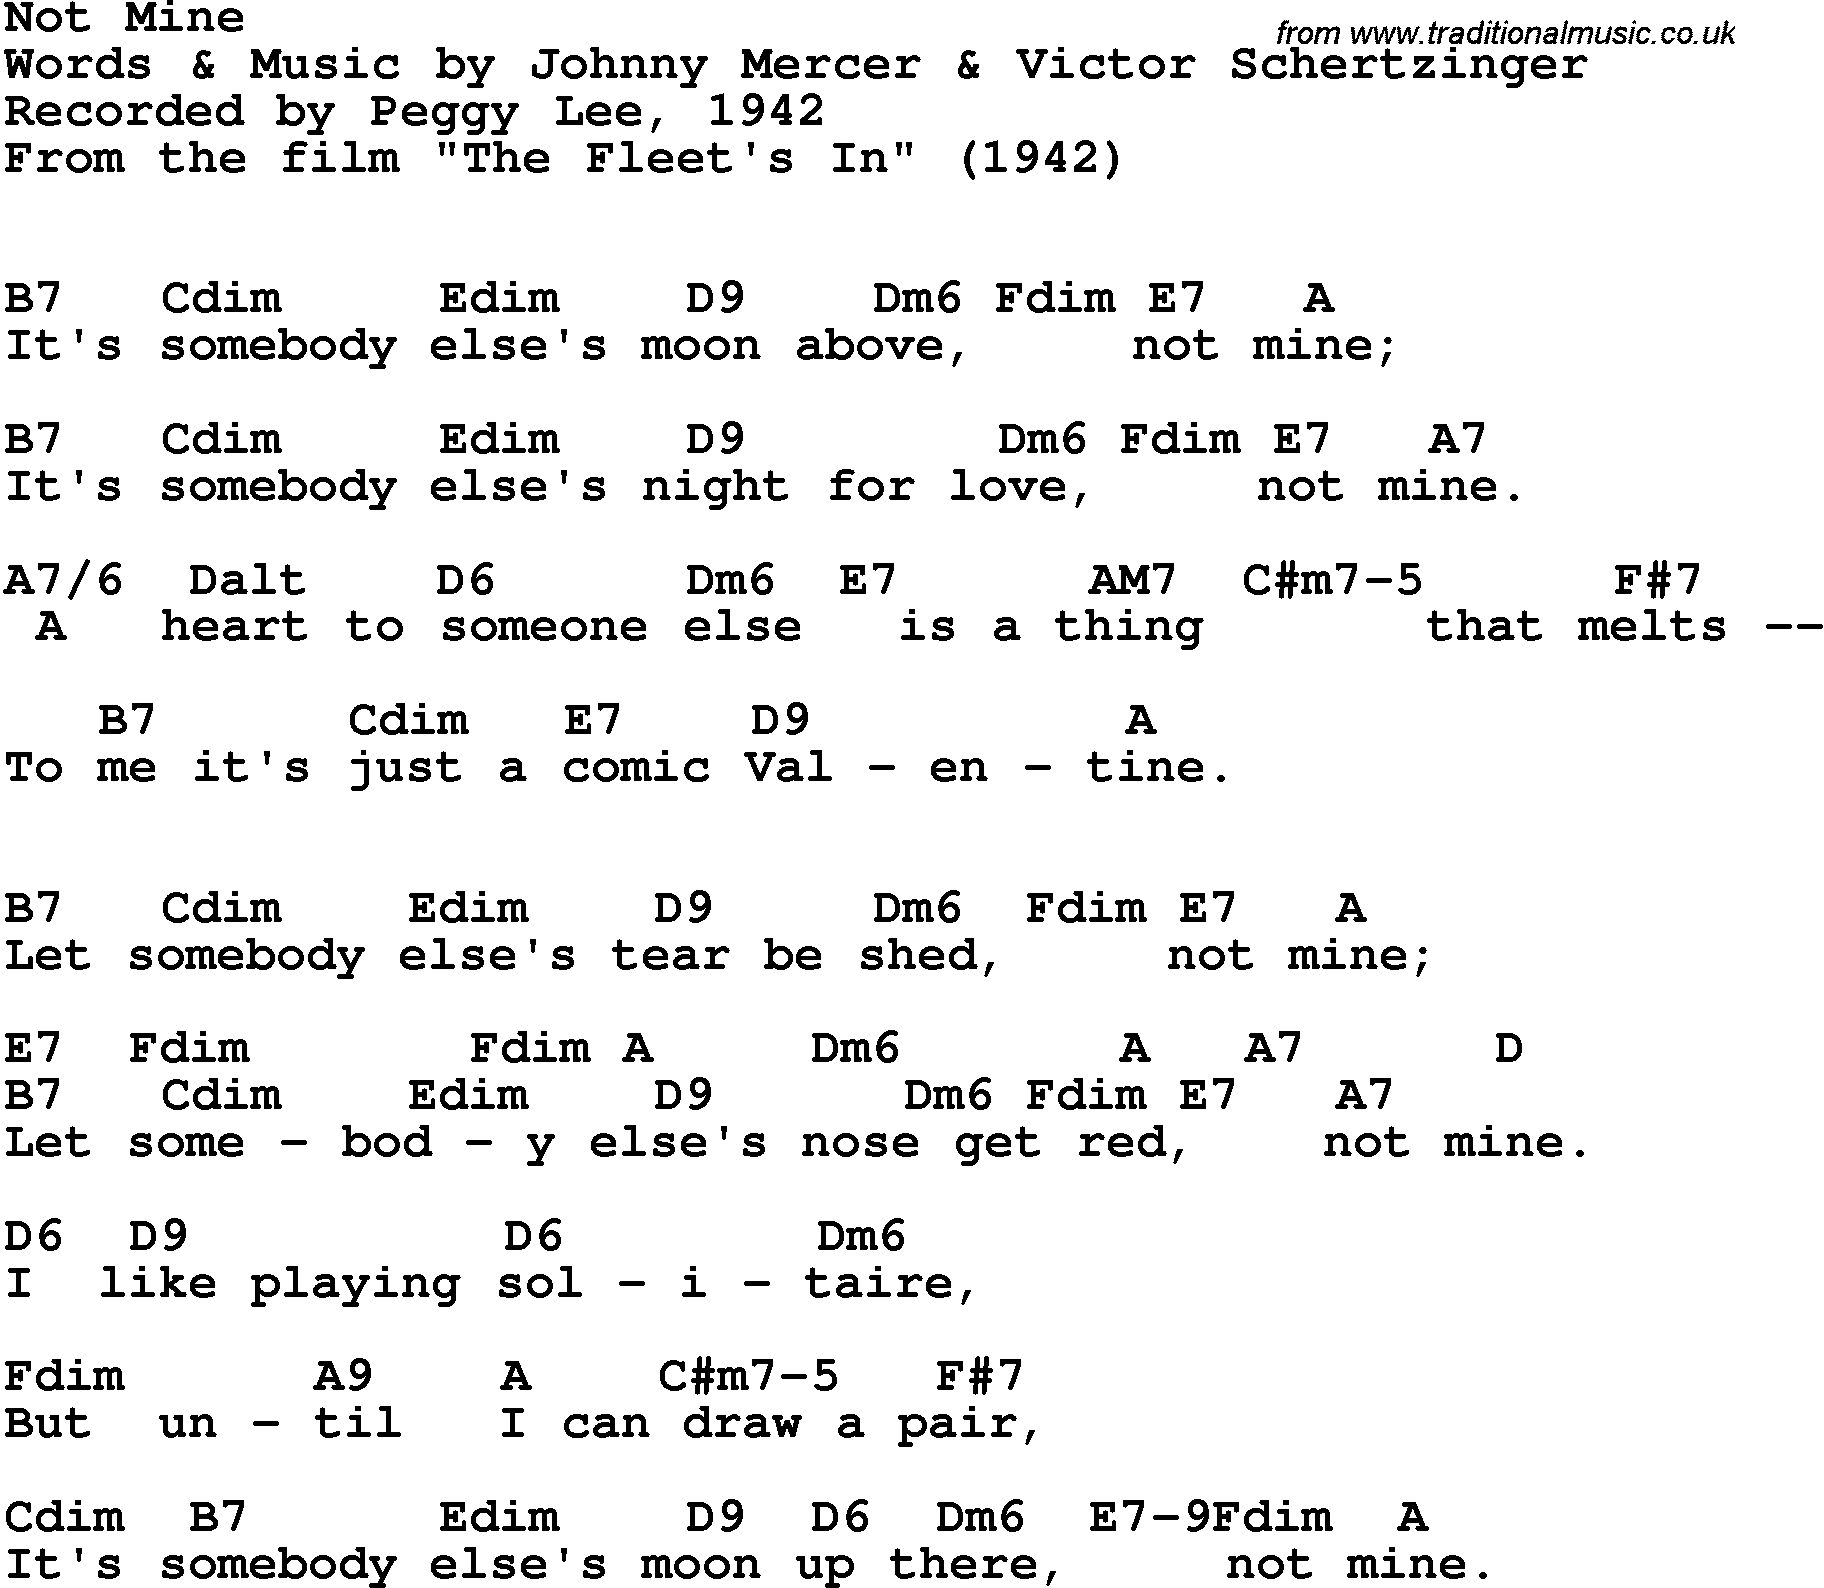 Song Lyrics with guitar chords for Not Mine - Peggy Lee, 1942